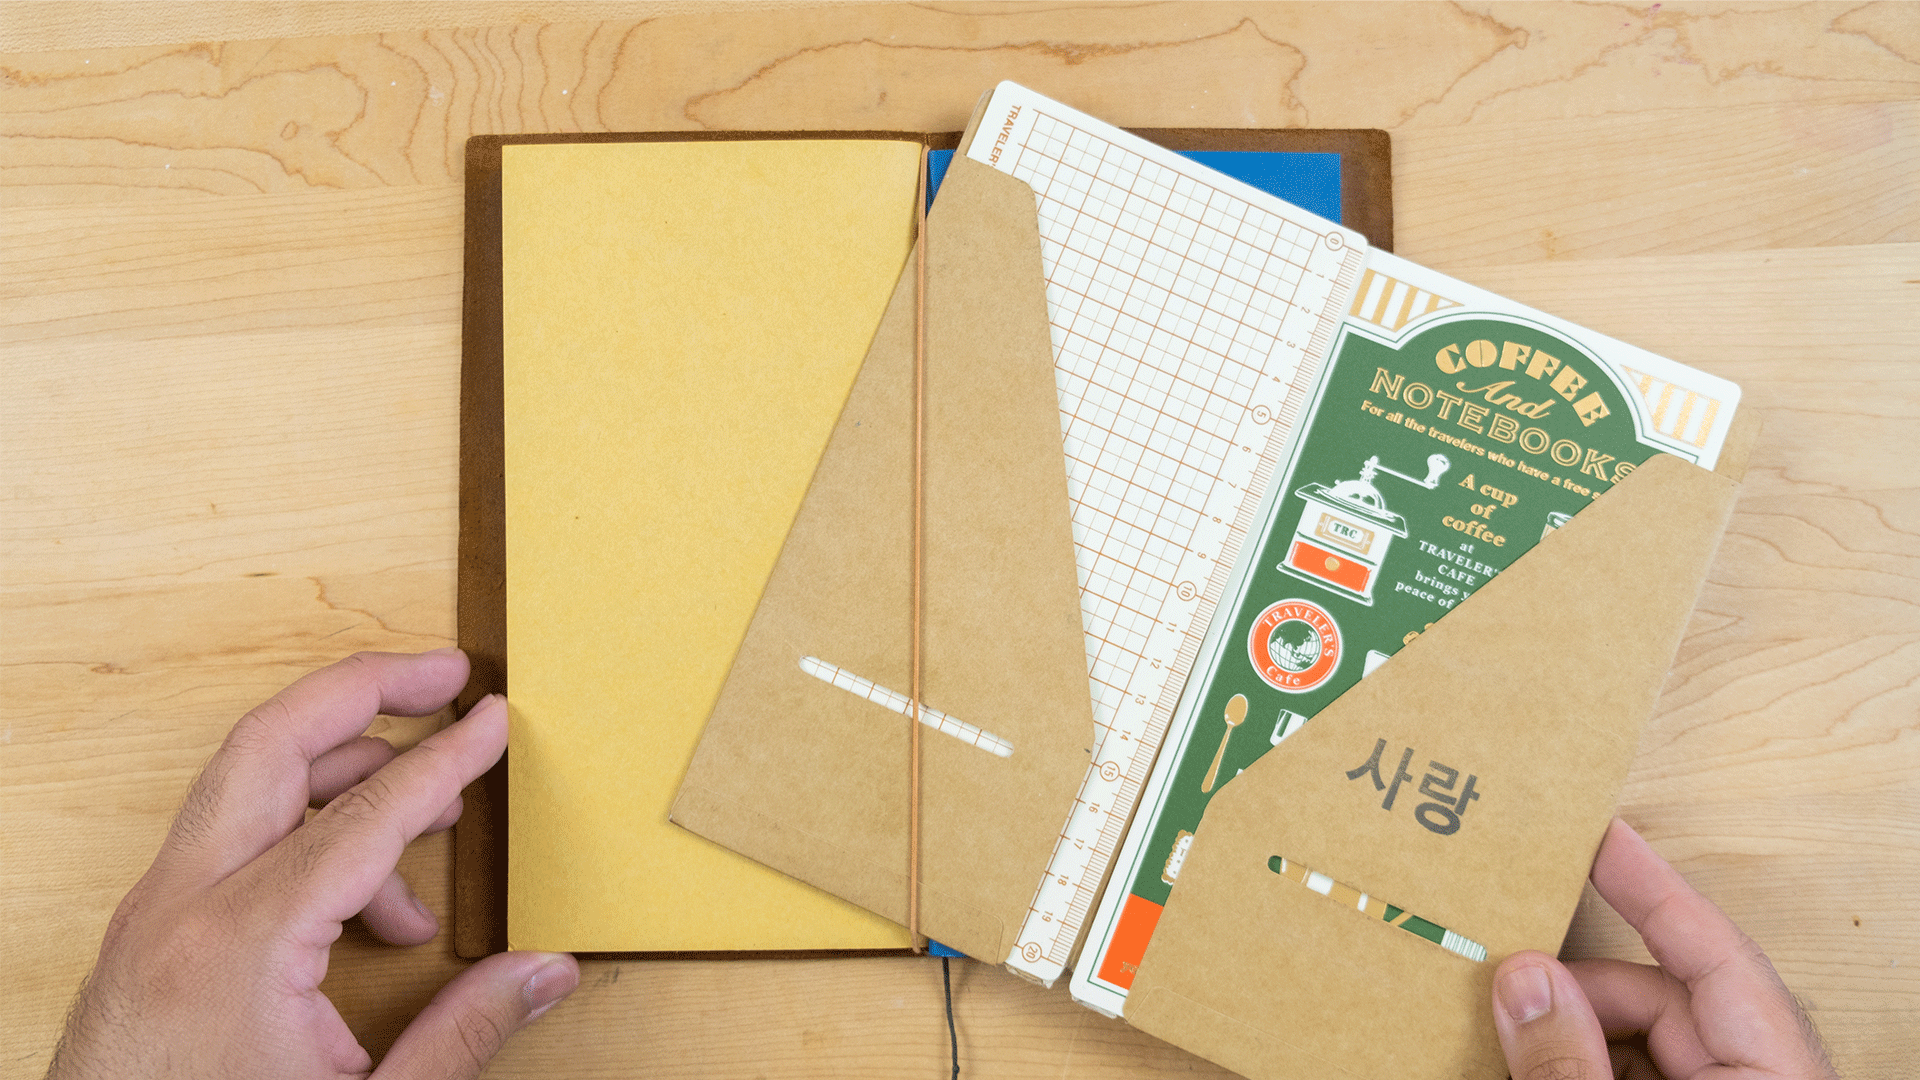 How to Assemble Different Elements into Your TRAVELER'S notebook